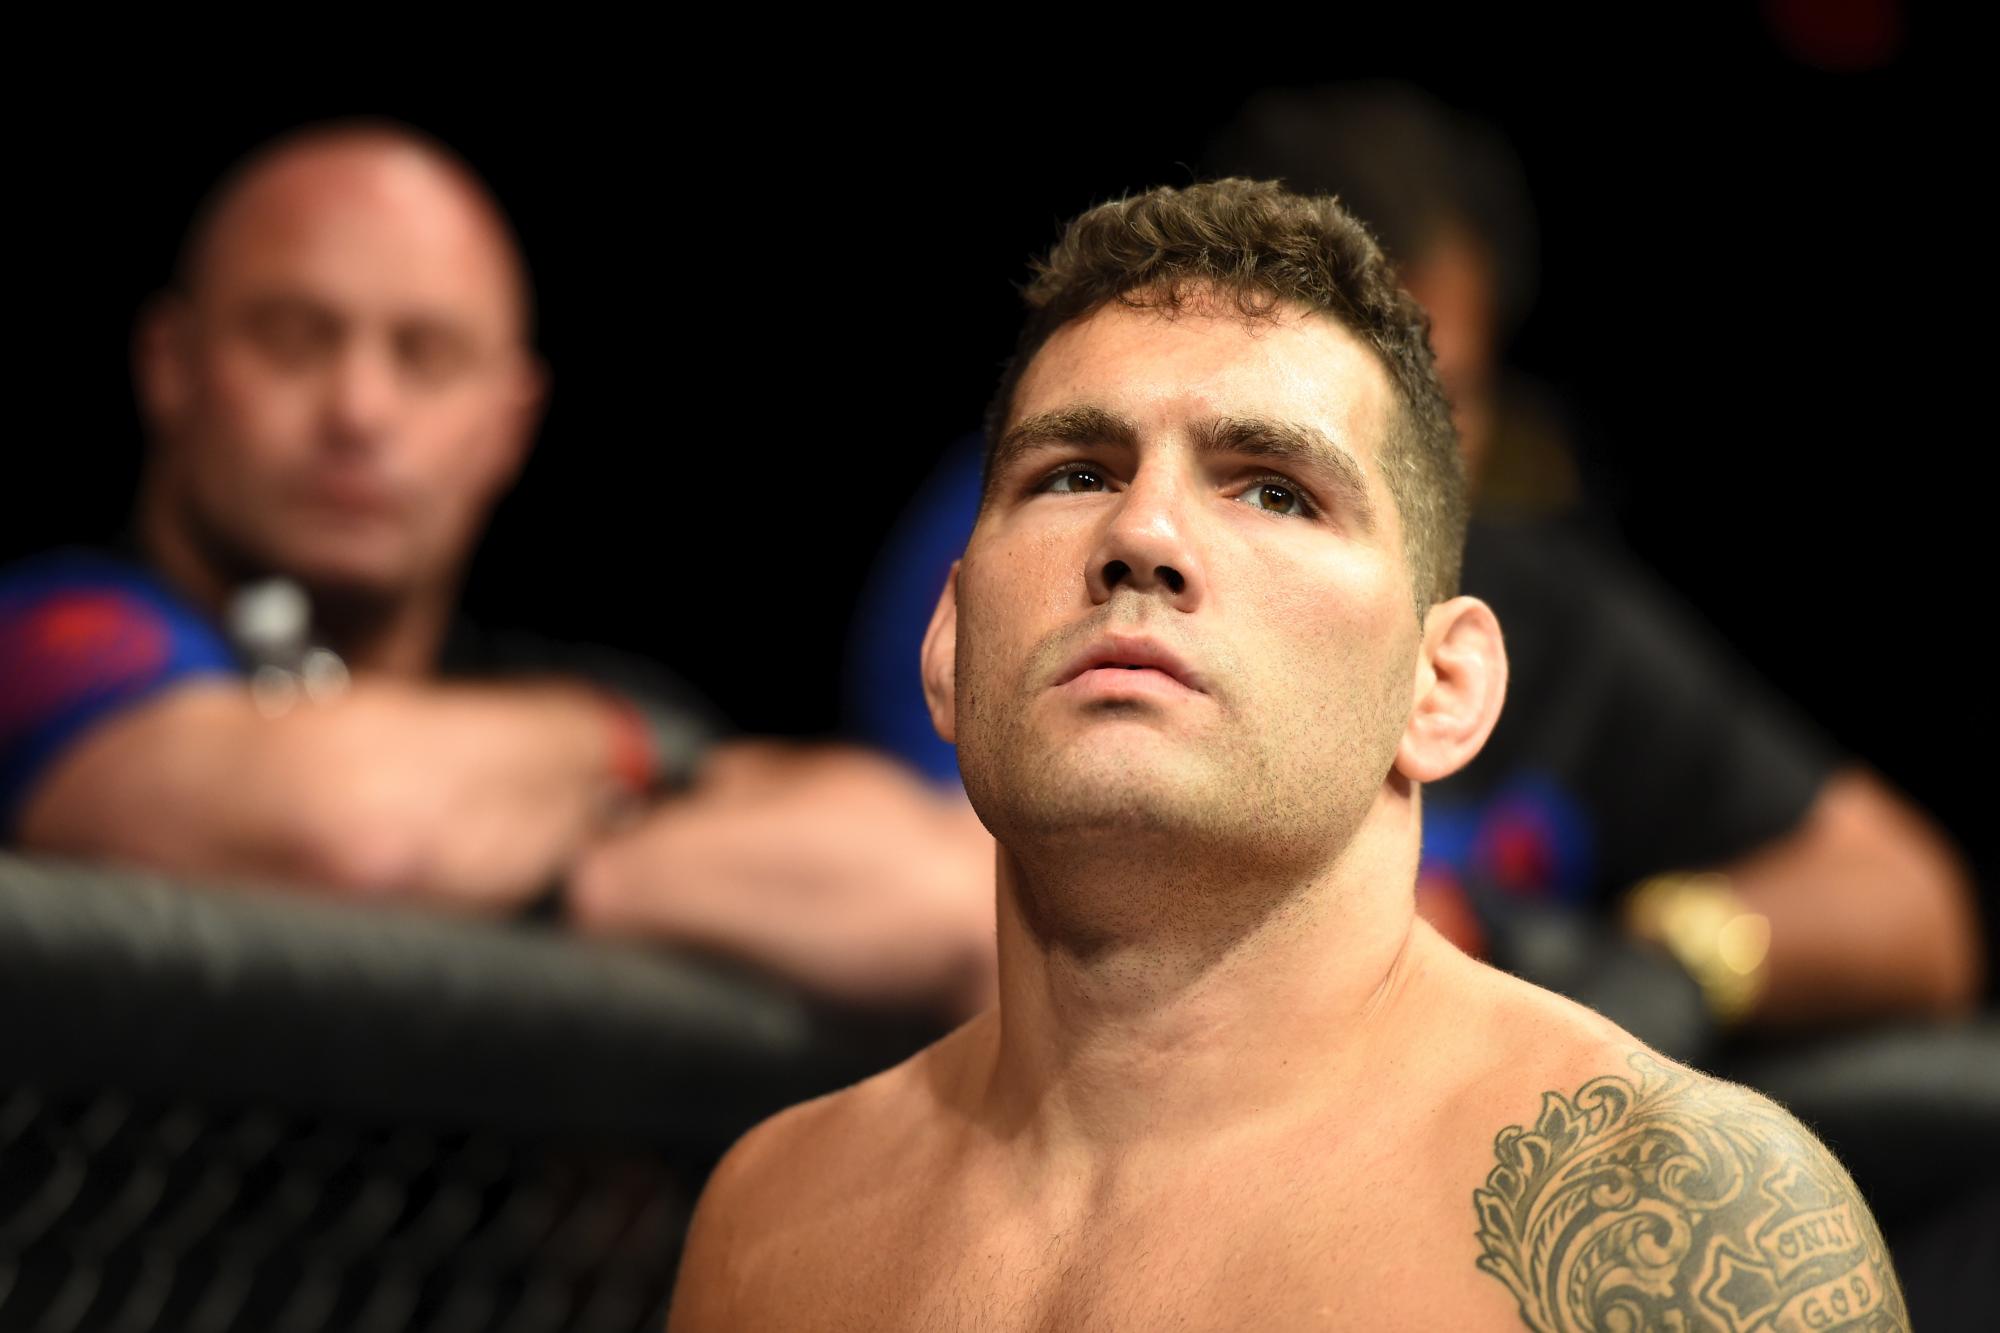 Chris Weidman plans to return to the UFC in 2022